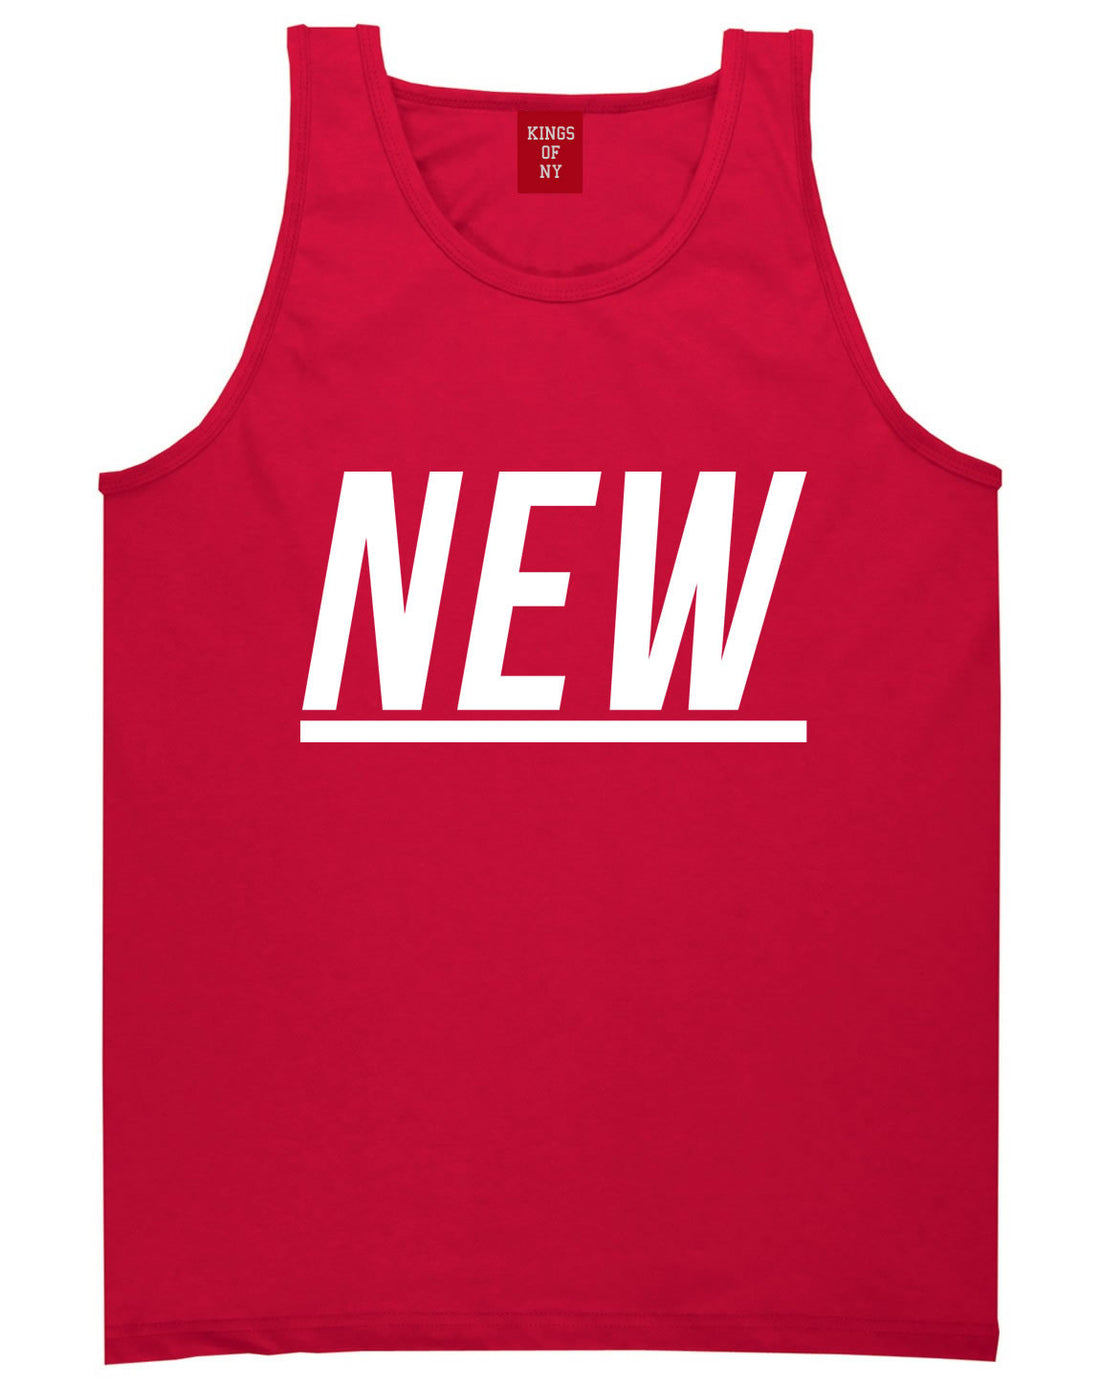 New Tank Top in Red by Kings Of NY